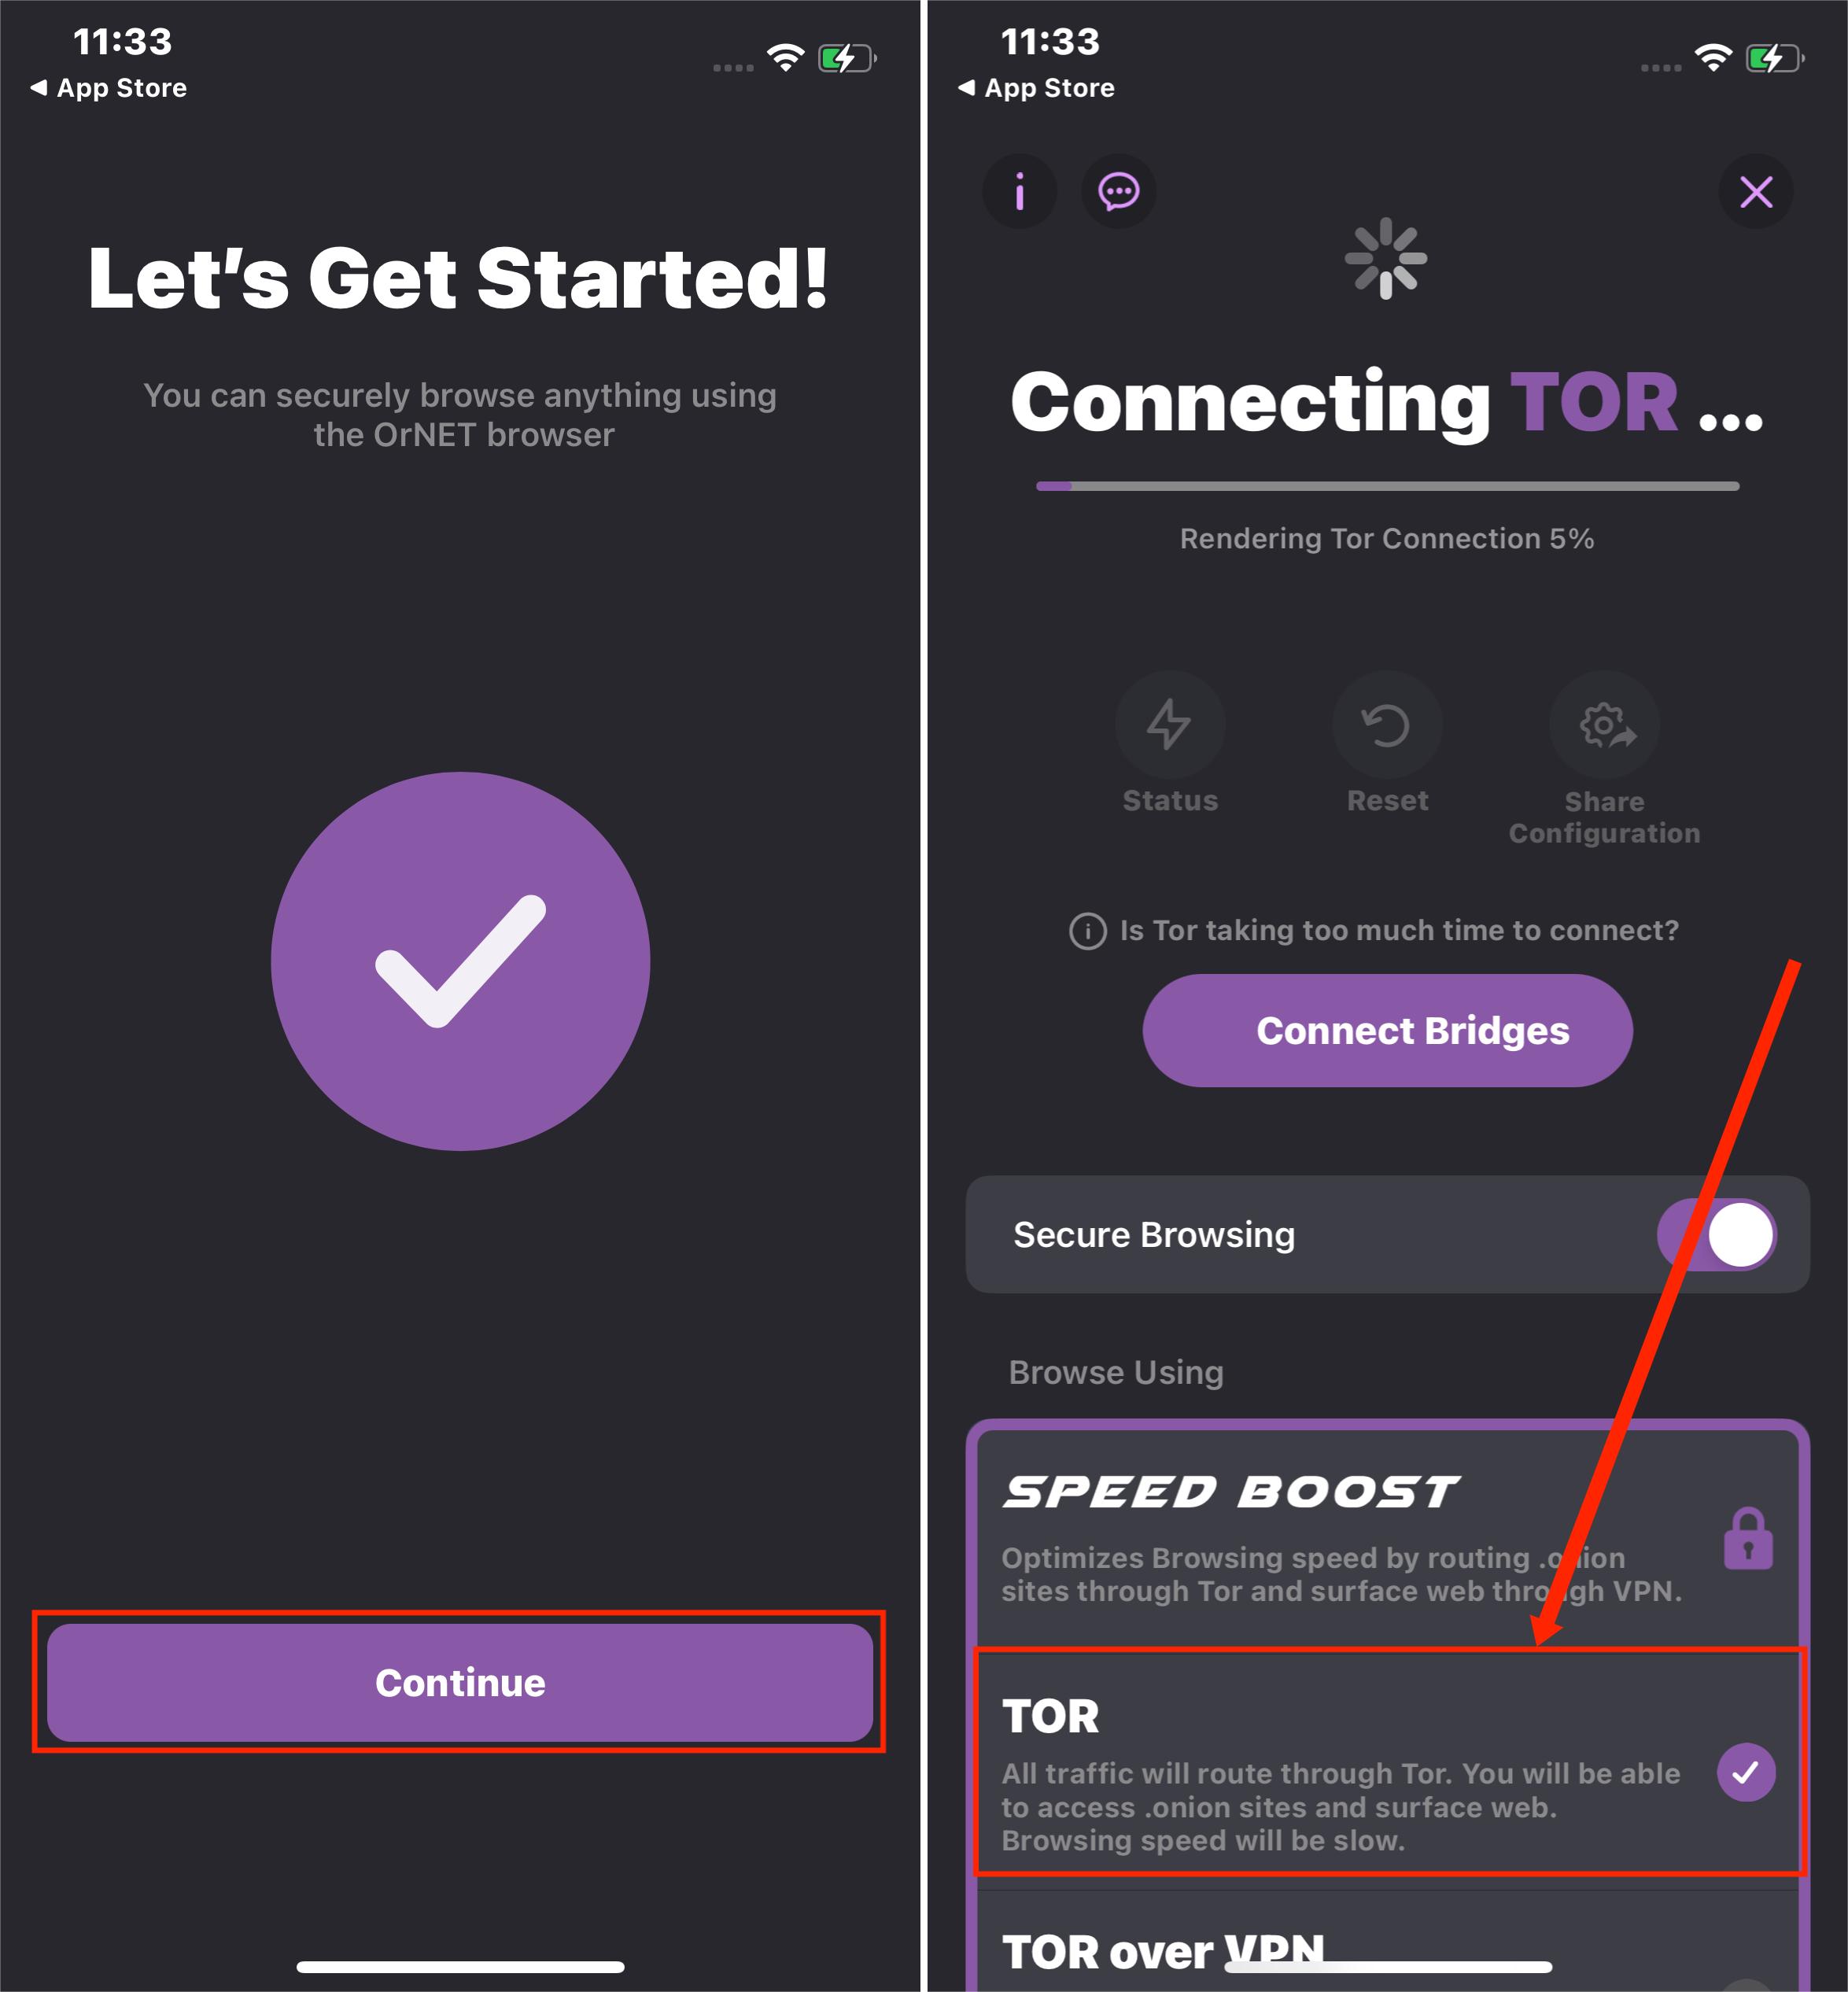 TOR App Get Started and Connecting